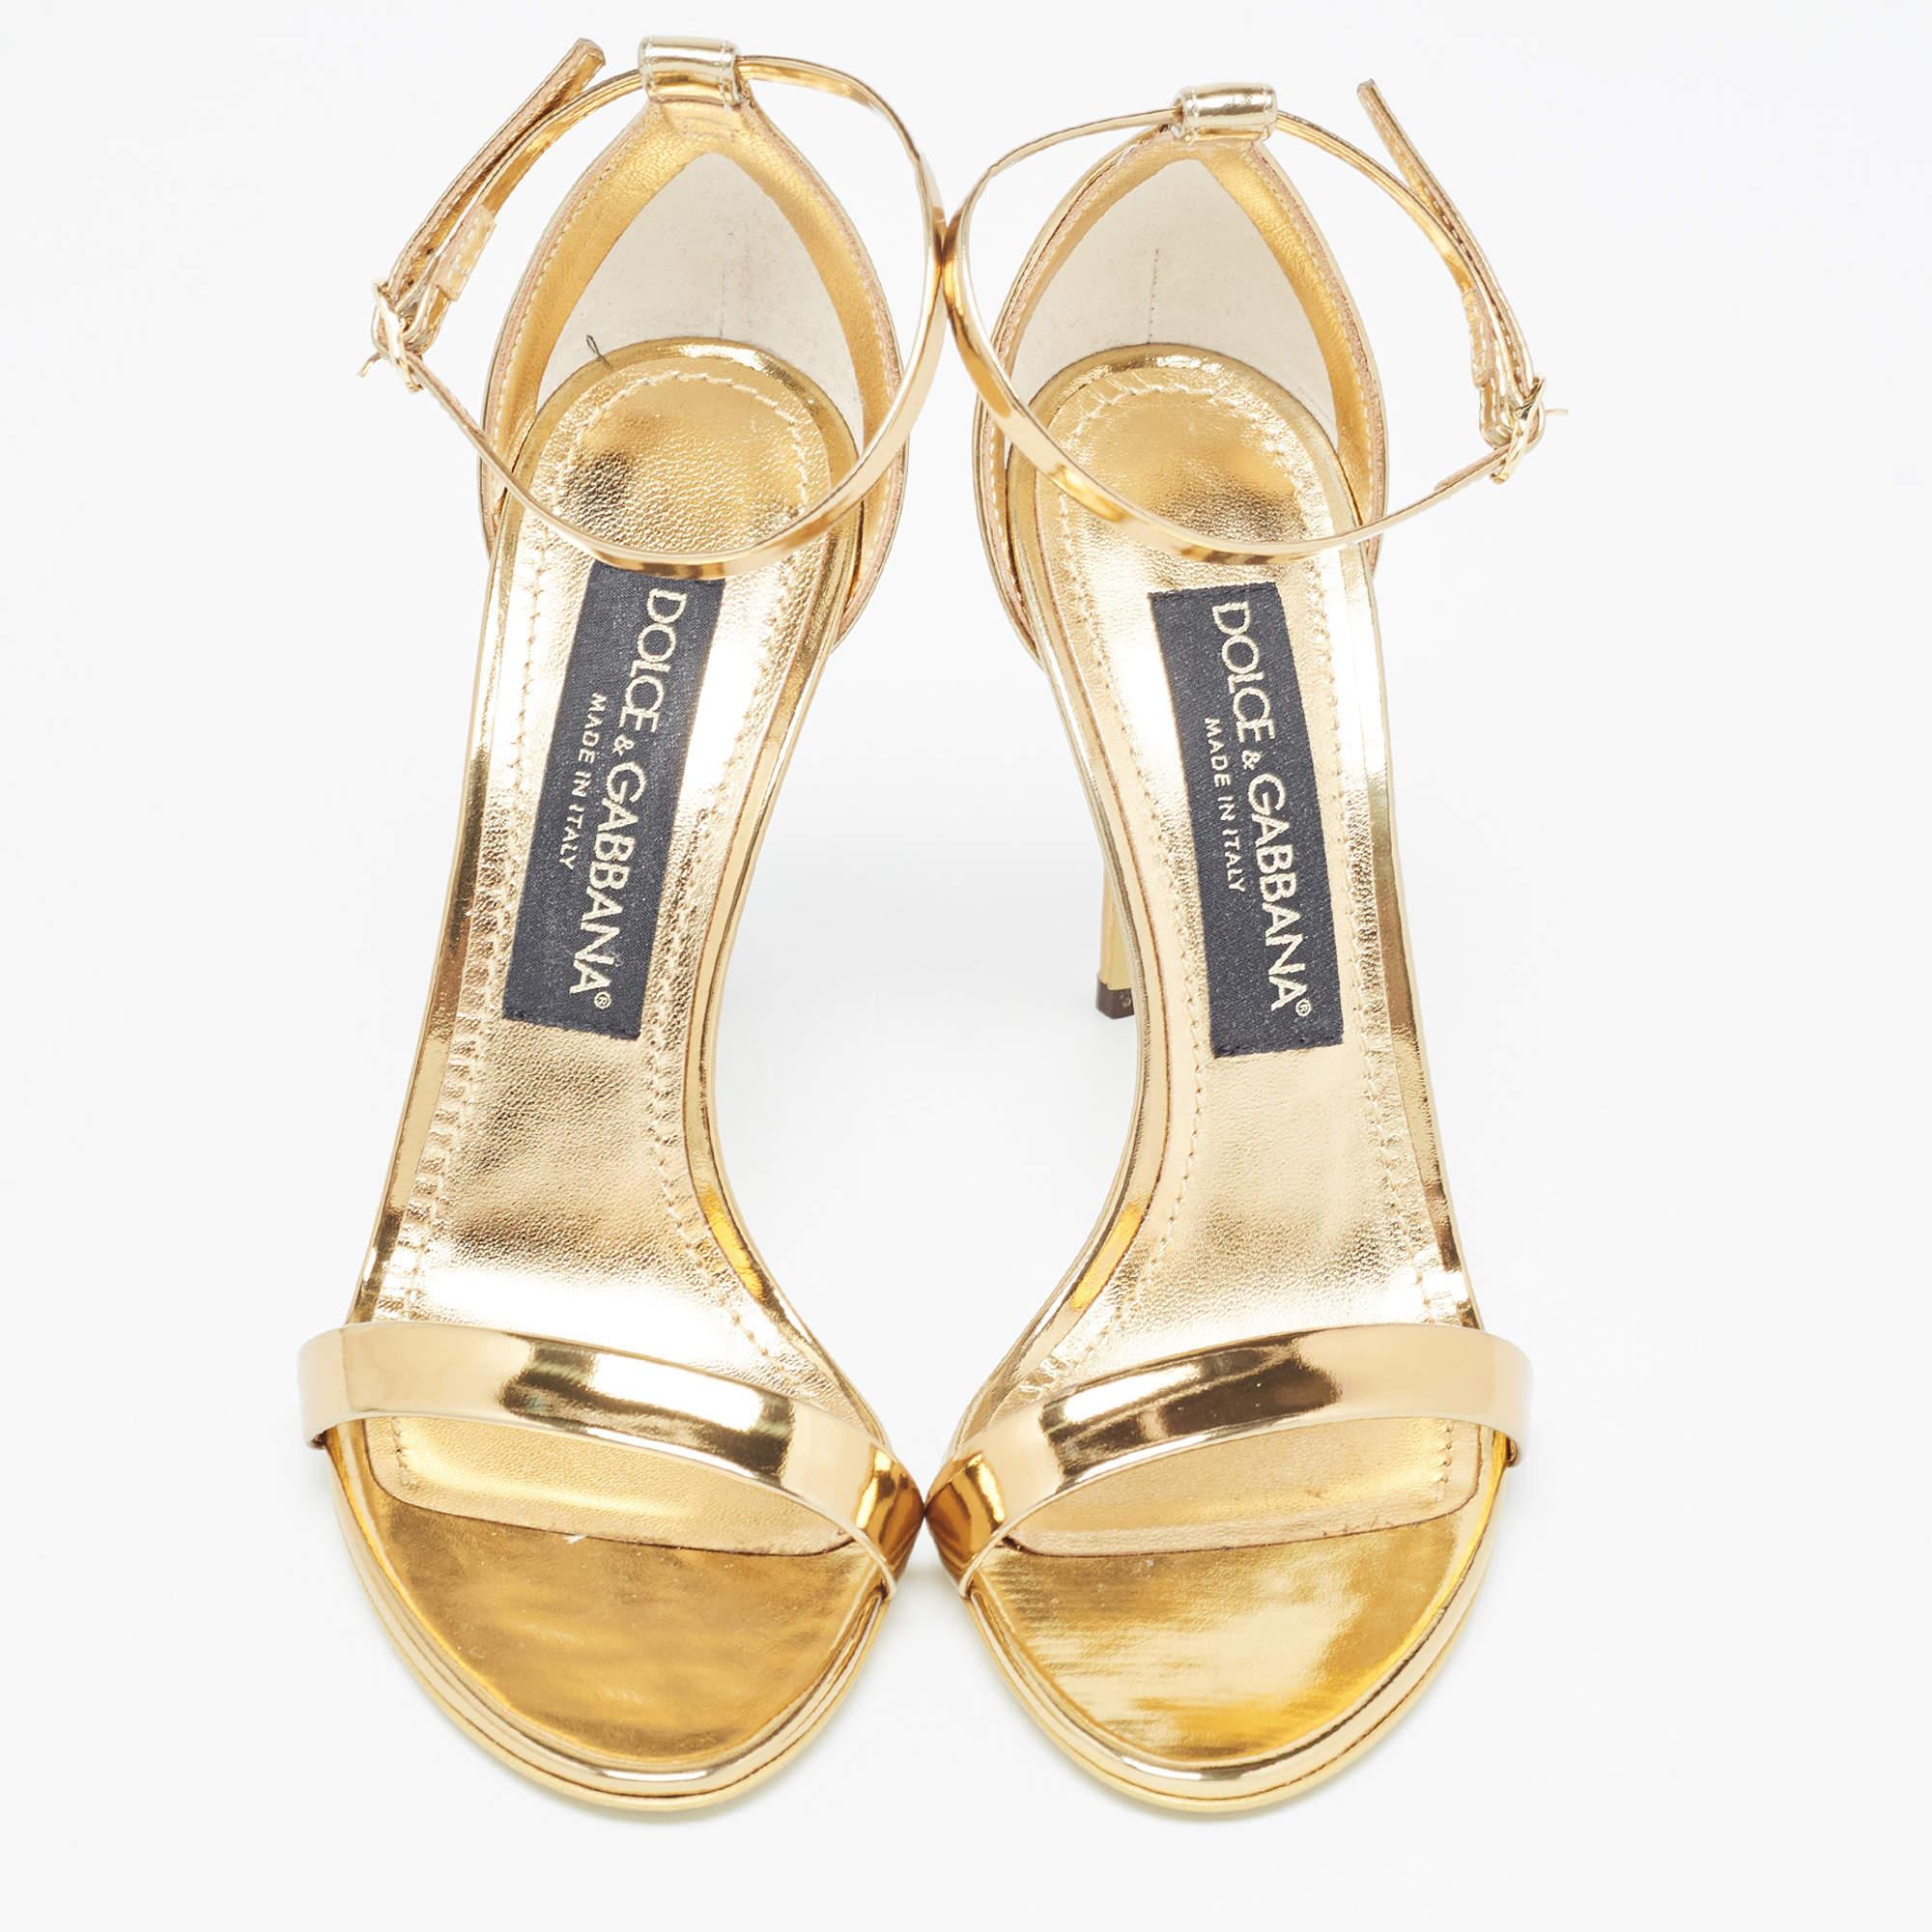 Dolce & Gabbana Gold Mirror Leather Ankle Strap Sandals Size 36 1